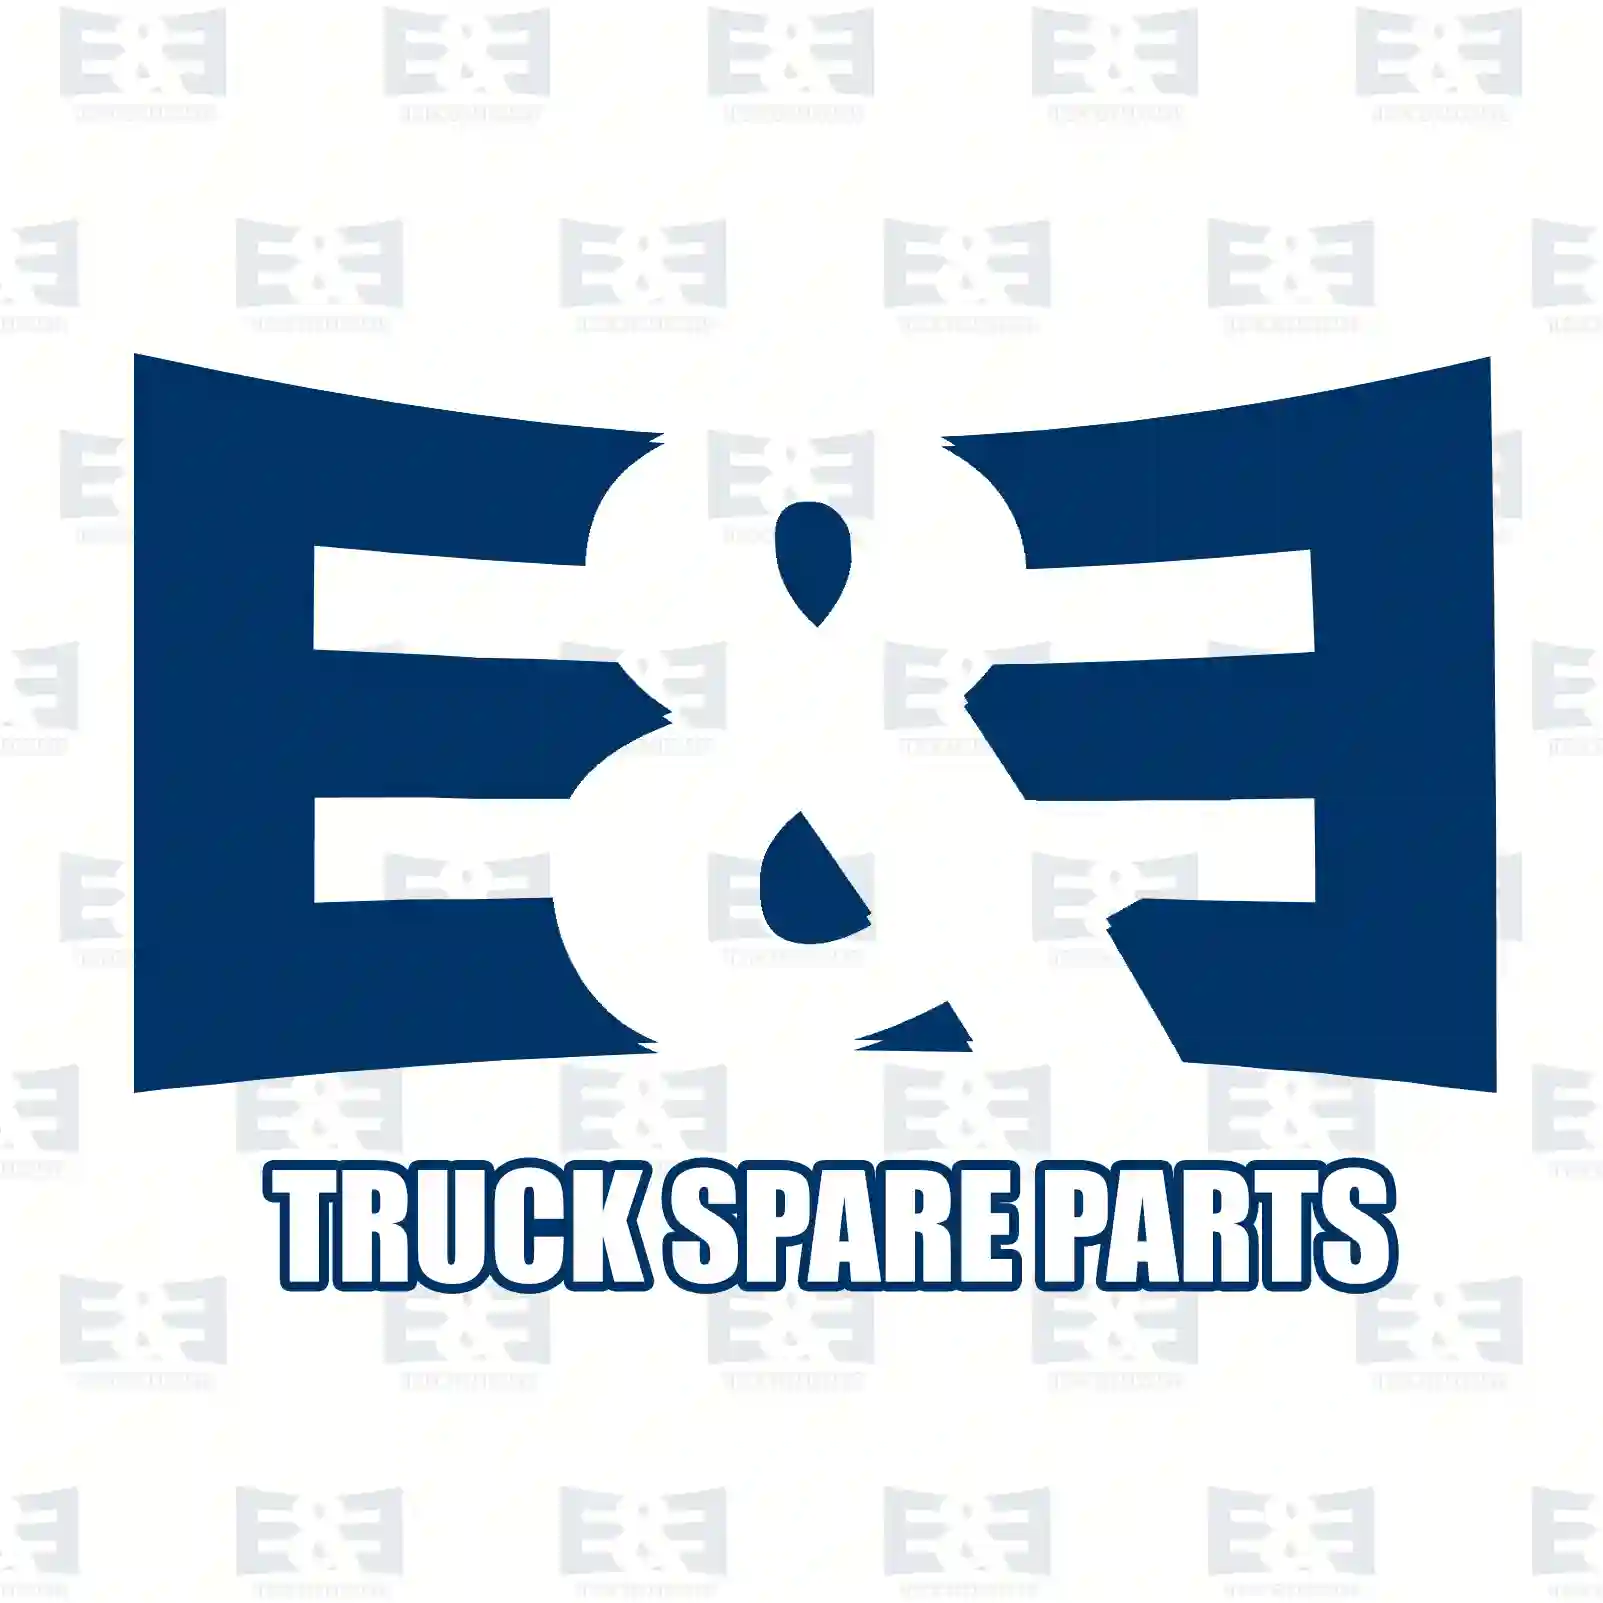 Adjusting Device Spacer ring, EE No 2E2294063 ,  oem no:68140012, 68140012PK15, 1697408 E&E Truck Spare Parts | Truck Spare Parts, Auotomotive Spare Parts